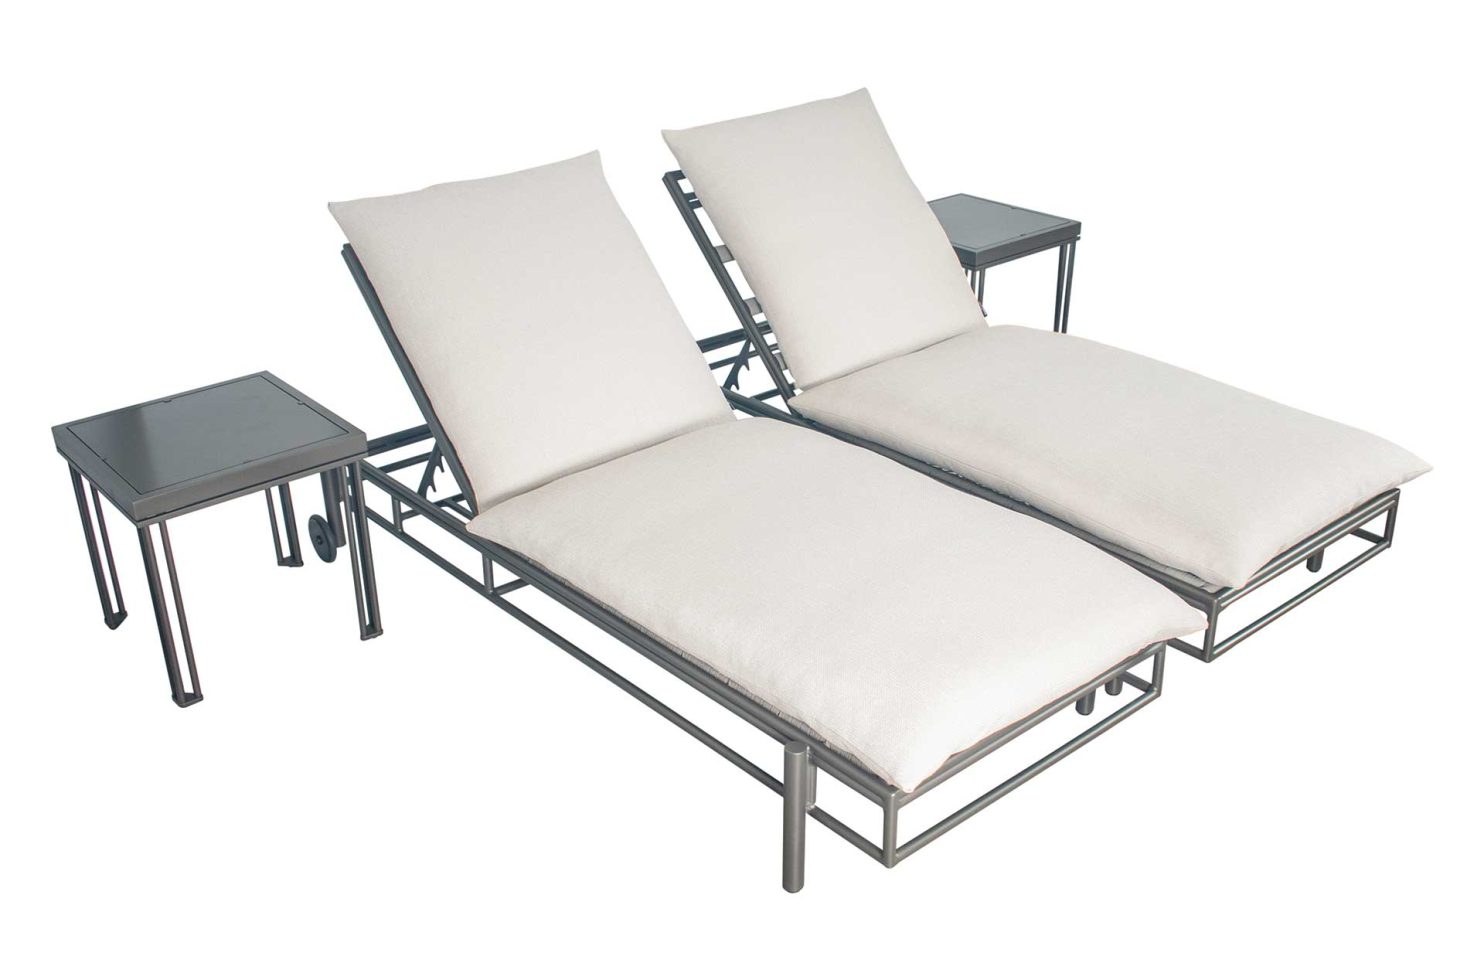 arch hebrides groups pool chaise side tables A620230055 A62023198 15 web